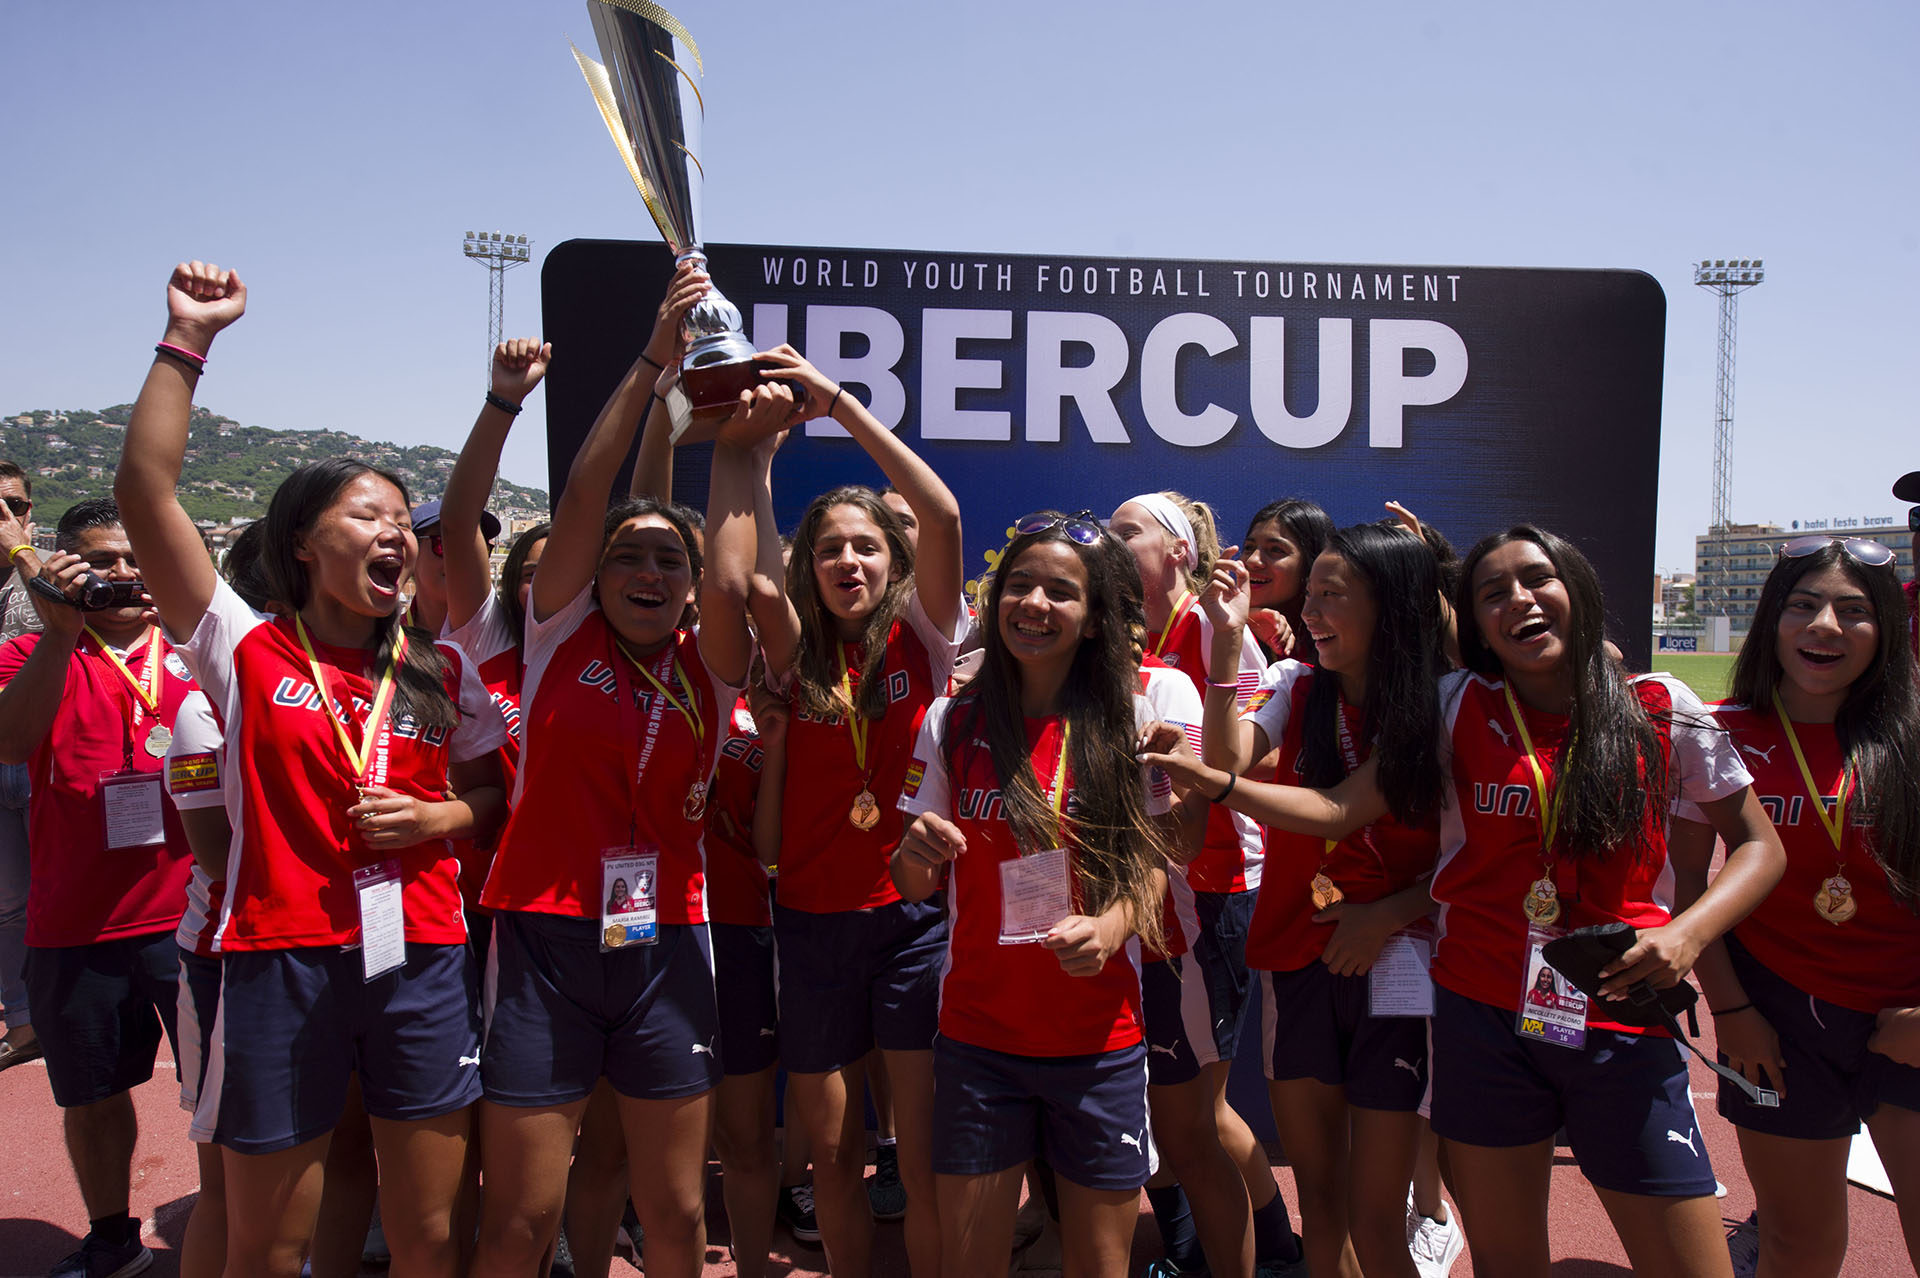 IberCup Barcelona - happy girls with the cup - Road to Sport